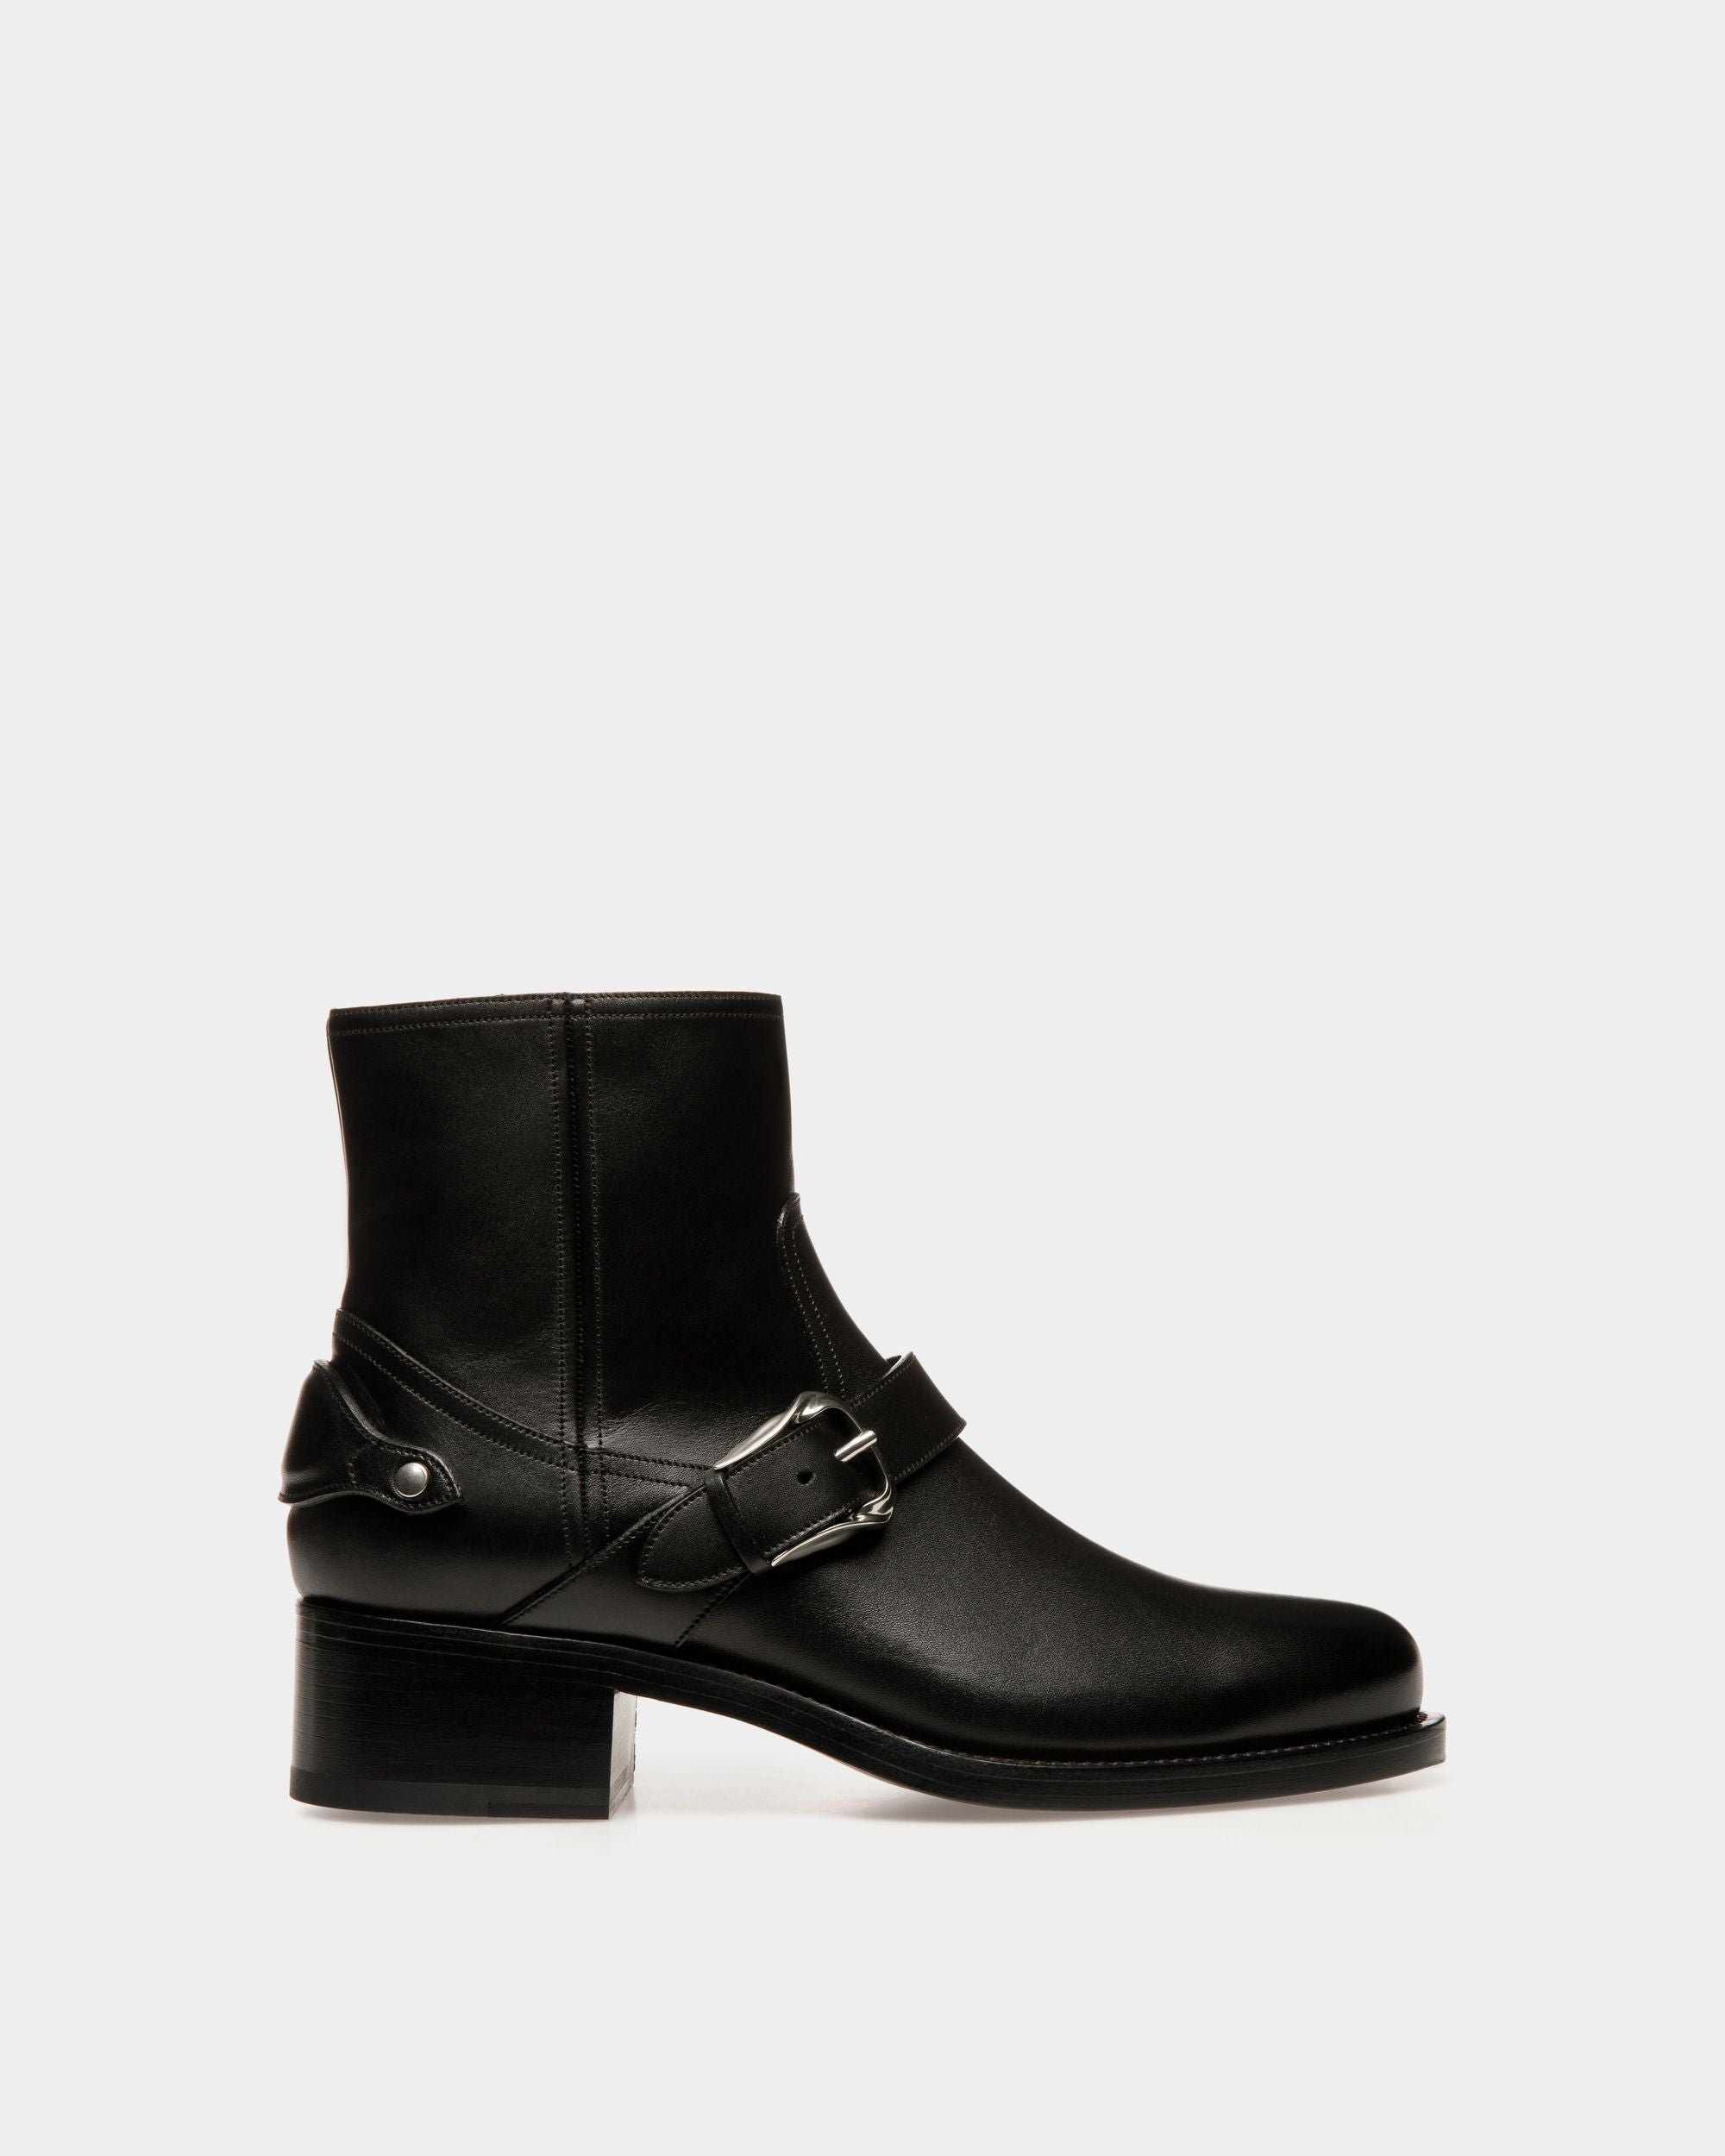 Arley | Men's Long Boots | Calf Leather | Bally | Still Life Side